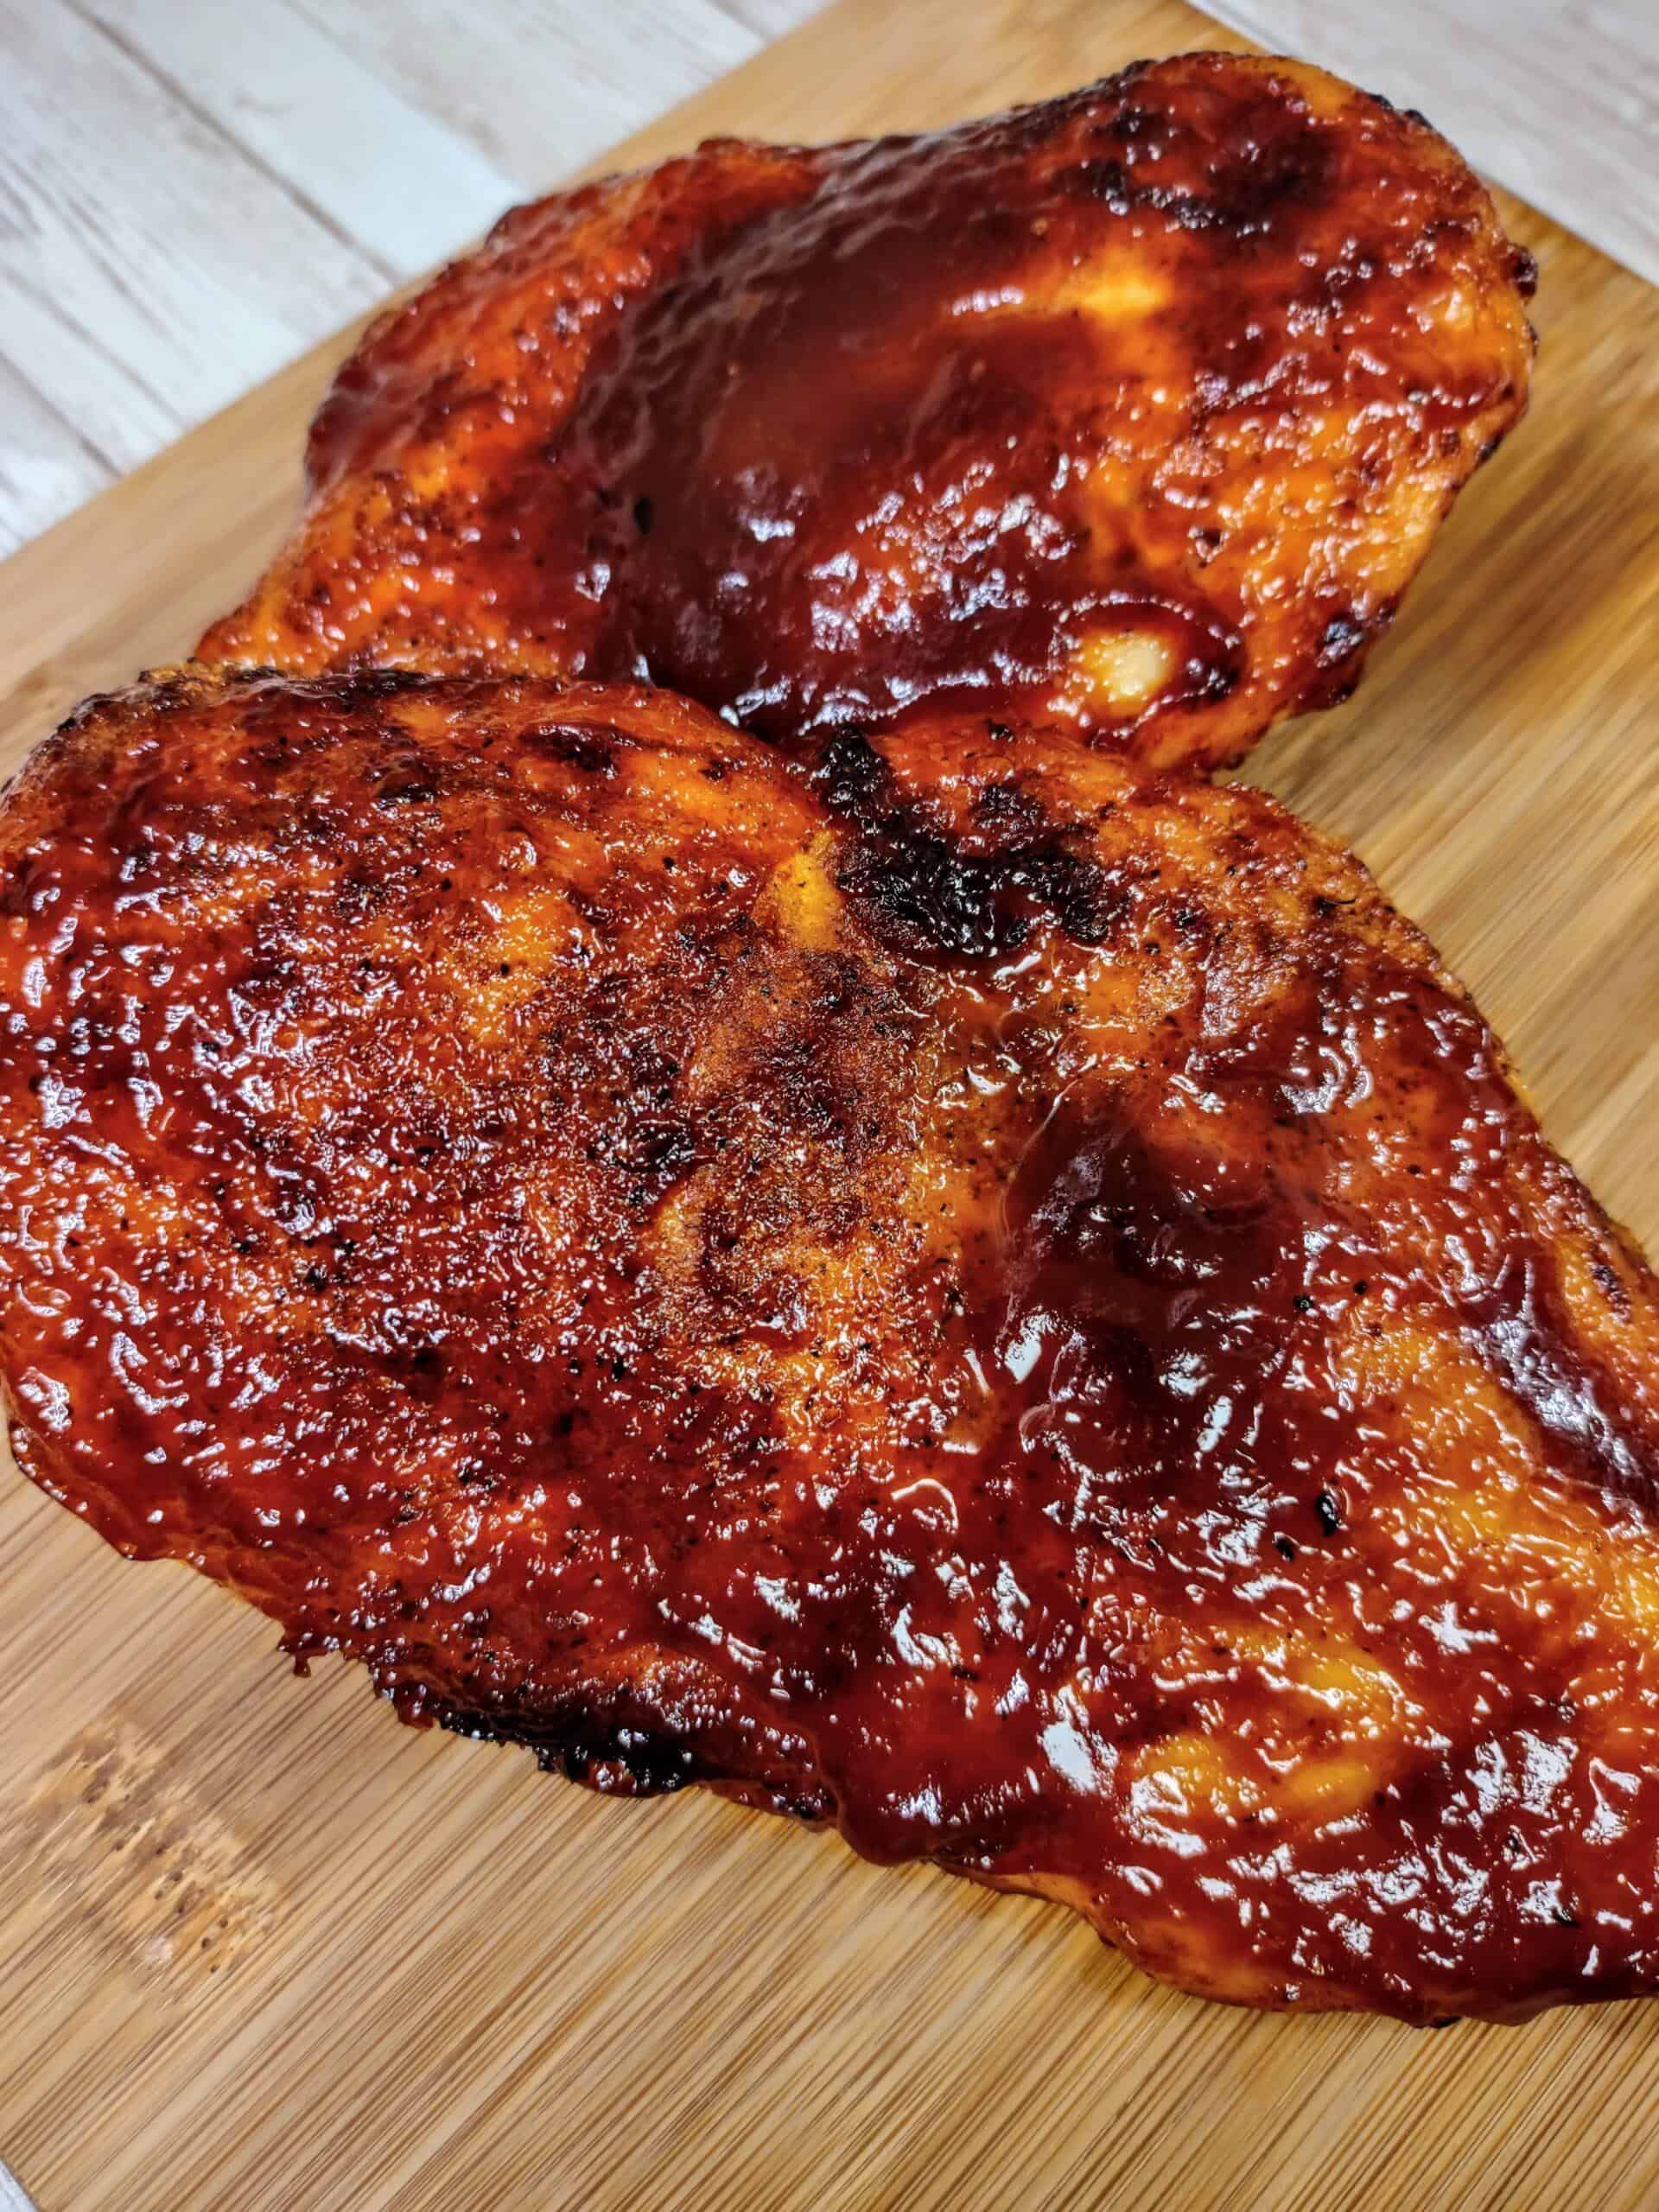 Chicken,Air Fryer,Barbecue Sauce,BBQ,Smoked Paprika